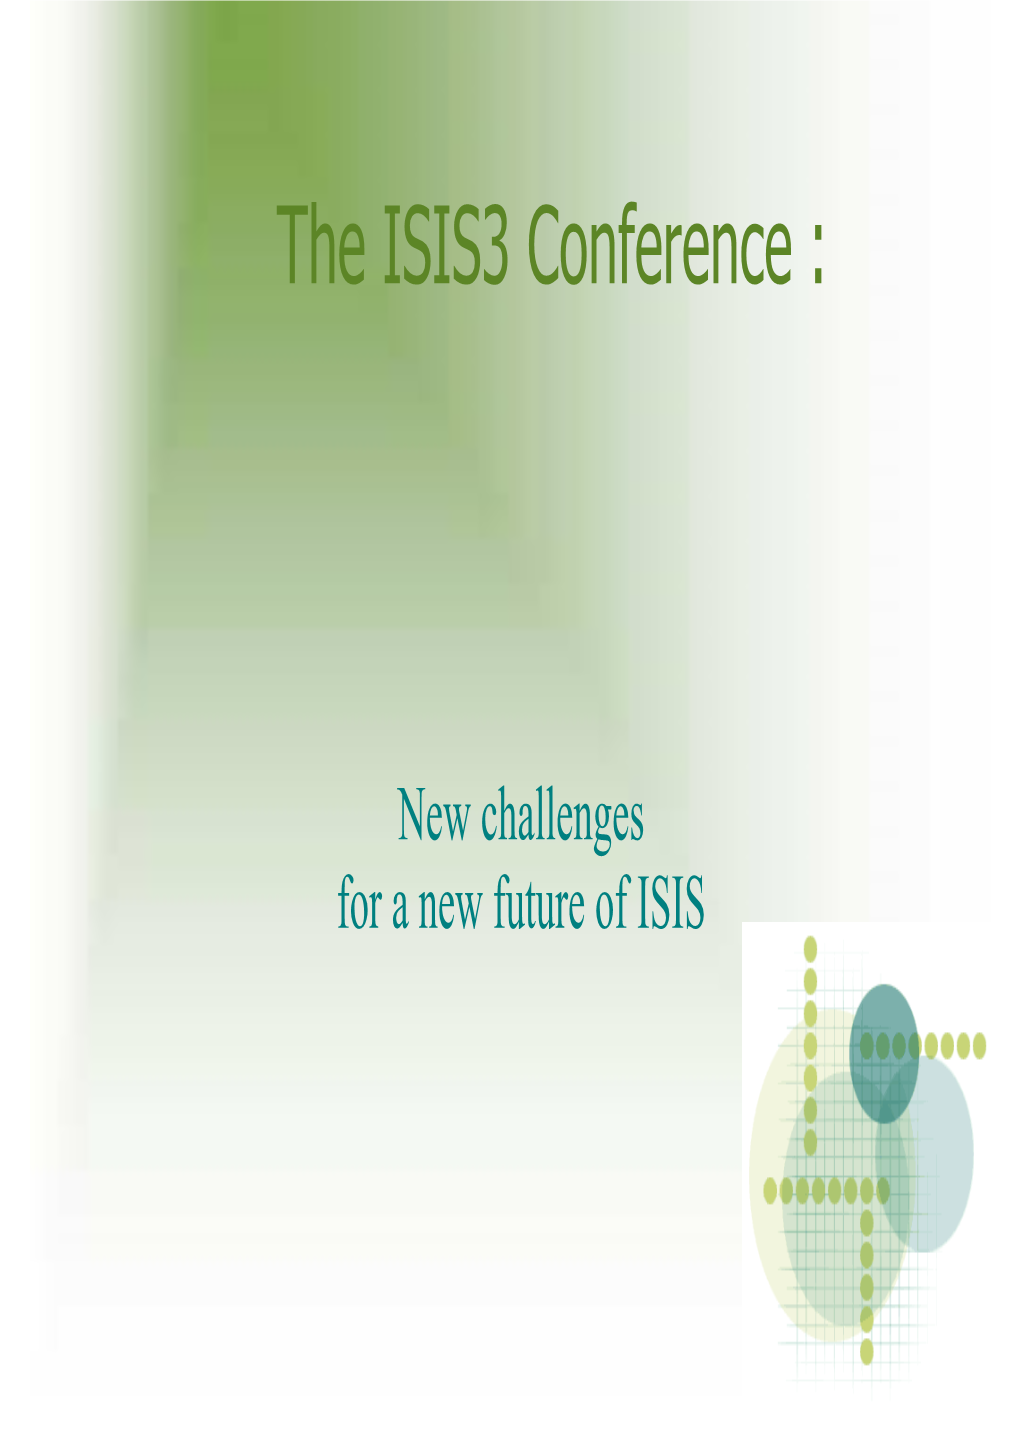 The ISIS3 Conference